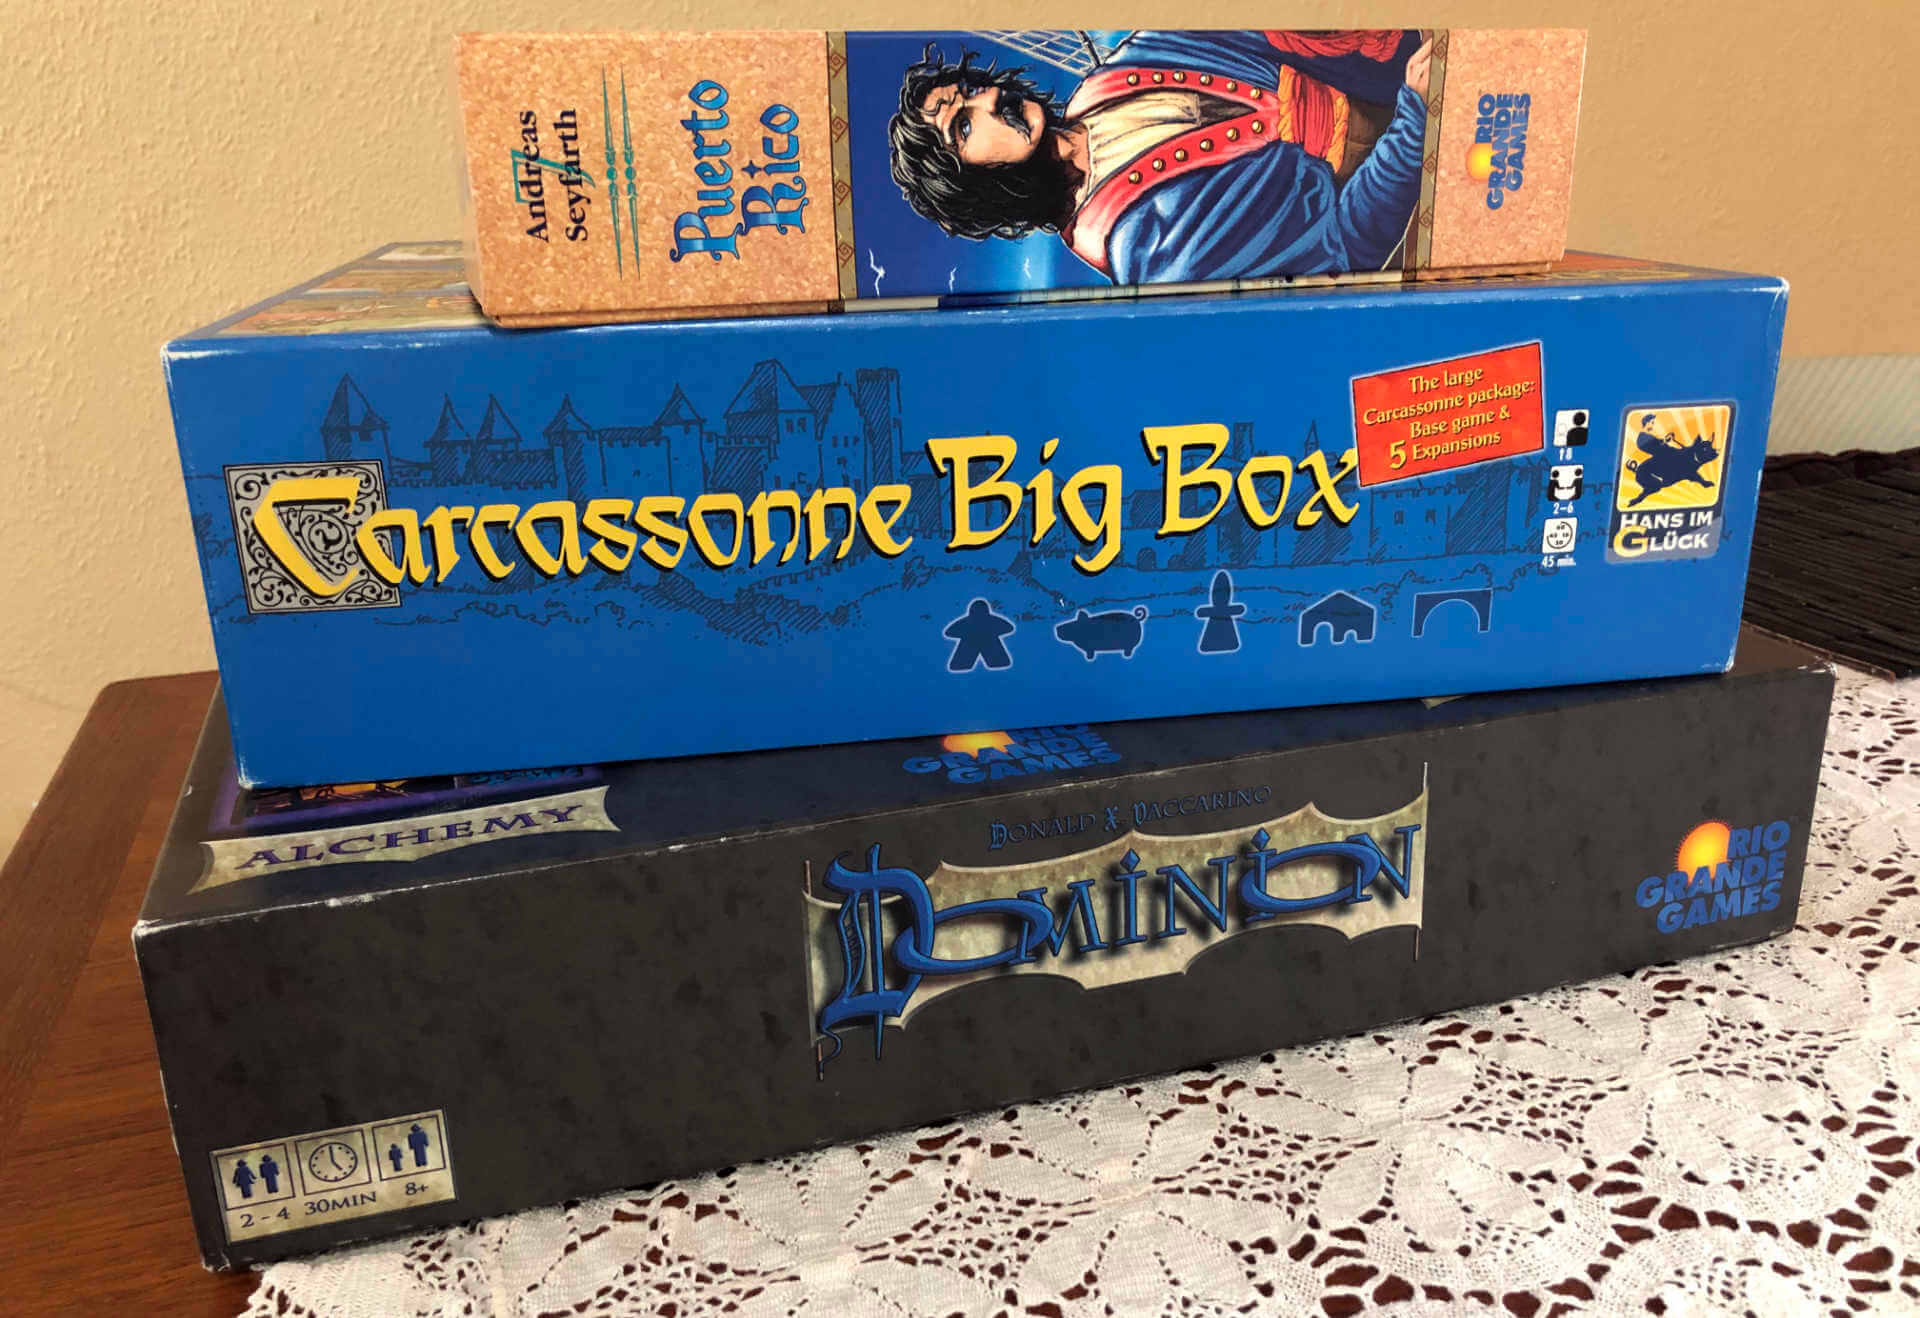 Three of the board games that are more approachable, European style strategy (instead of luck) focussed games: Dominion, Carcassonne, and Puerto Rico.